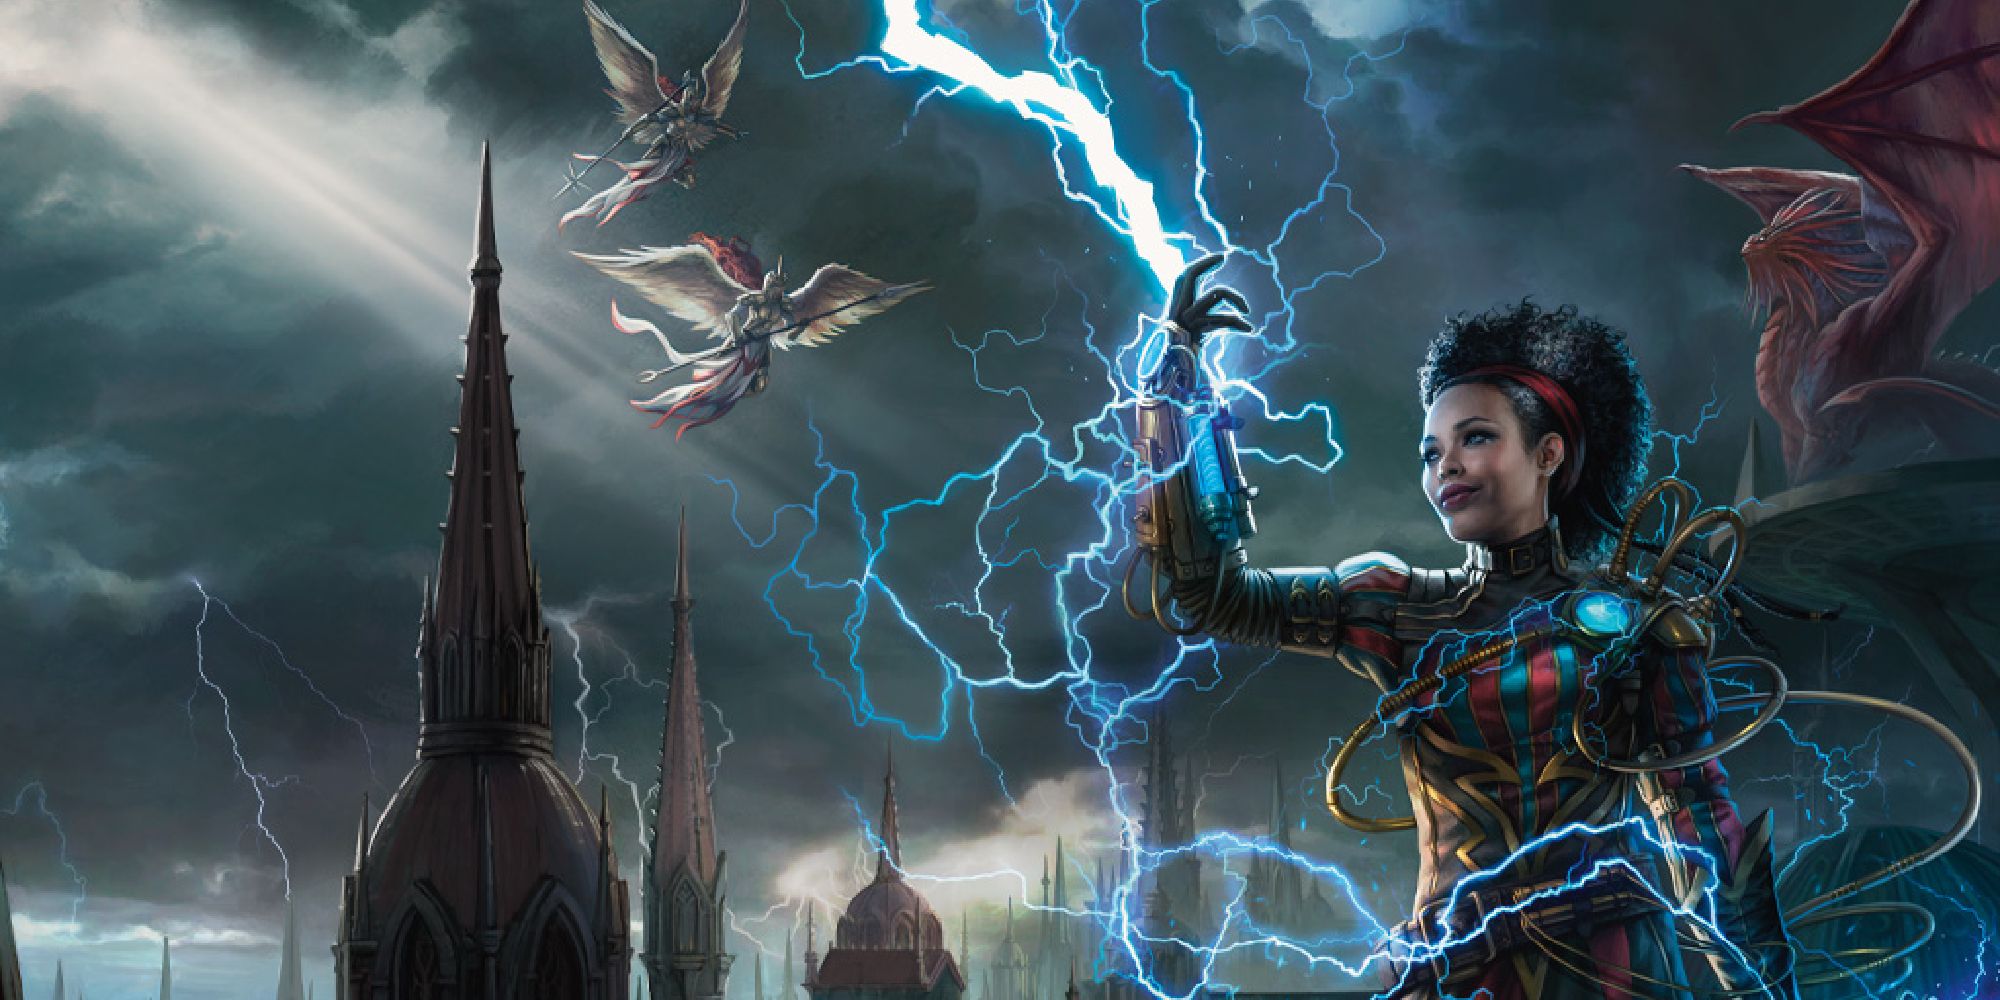 A woman summons lightening to her hand, the spires of buildings and winged creatures rising in the background. 